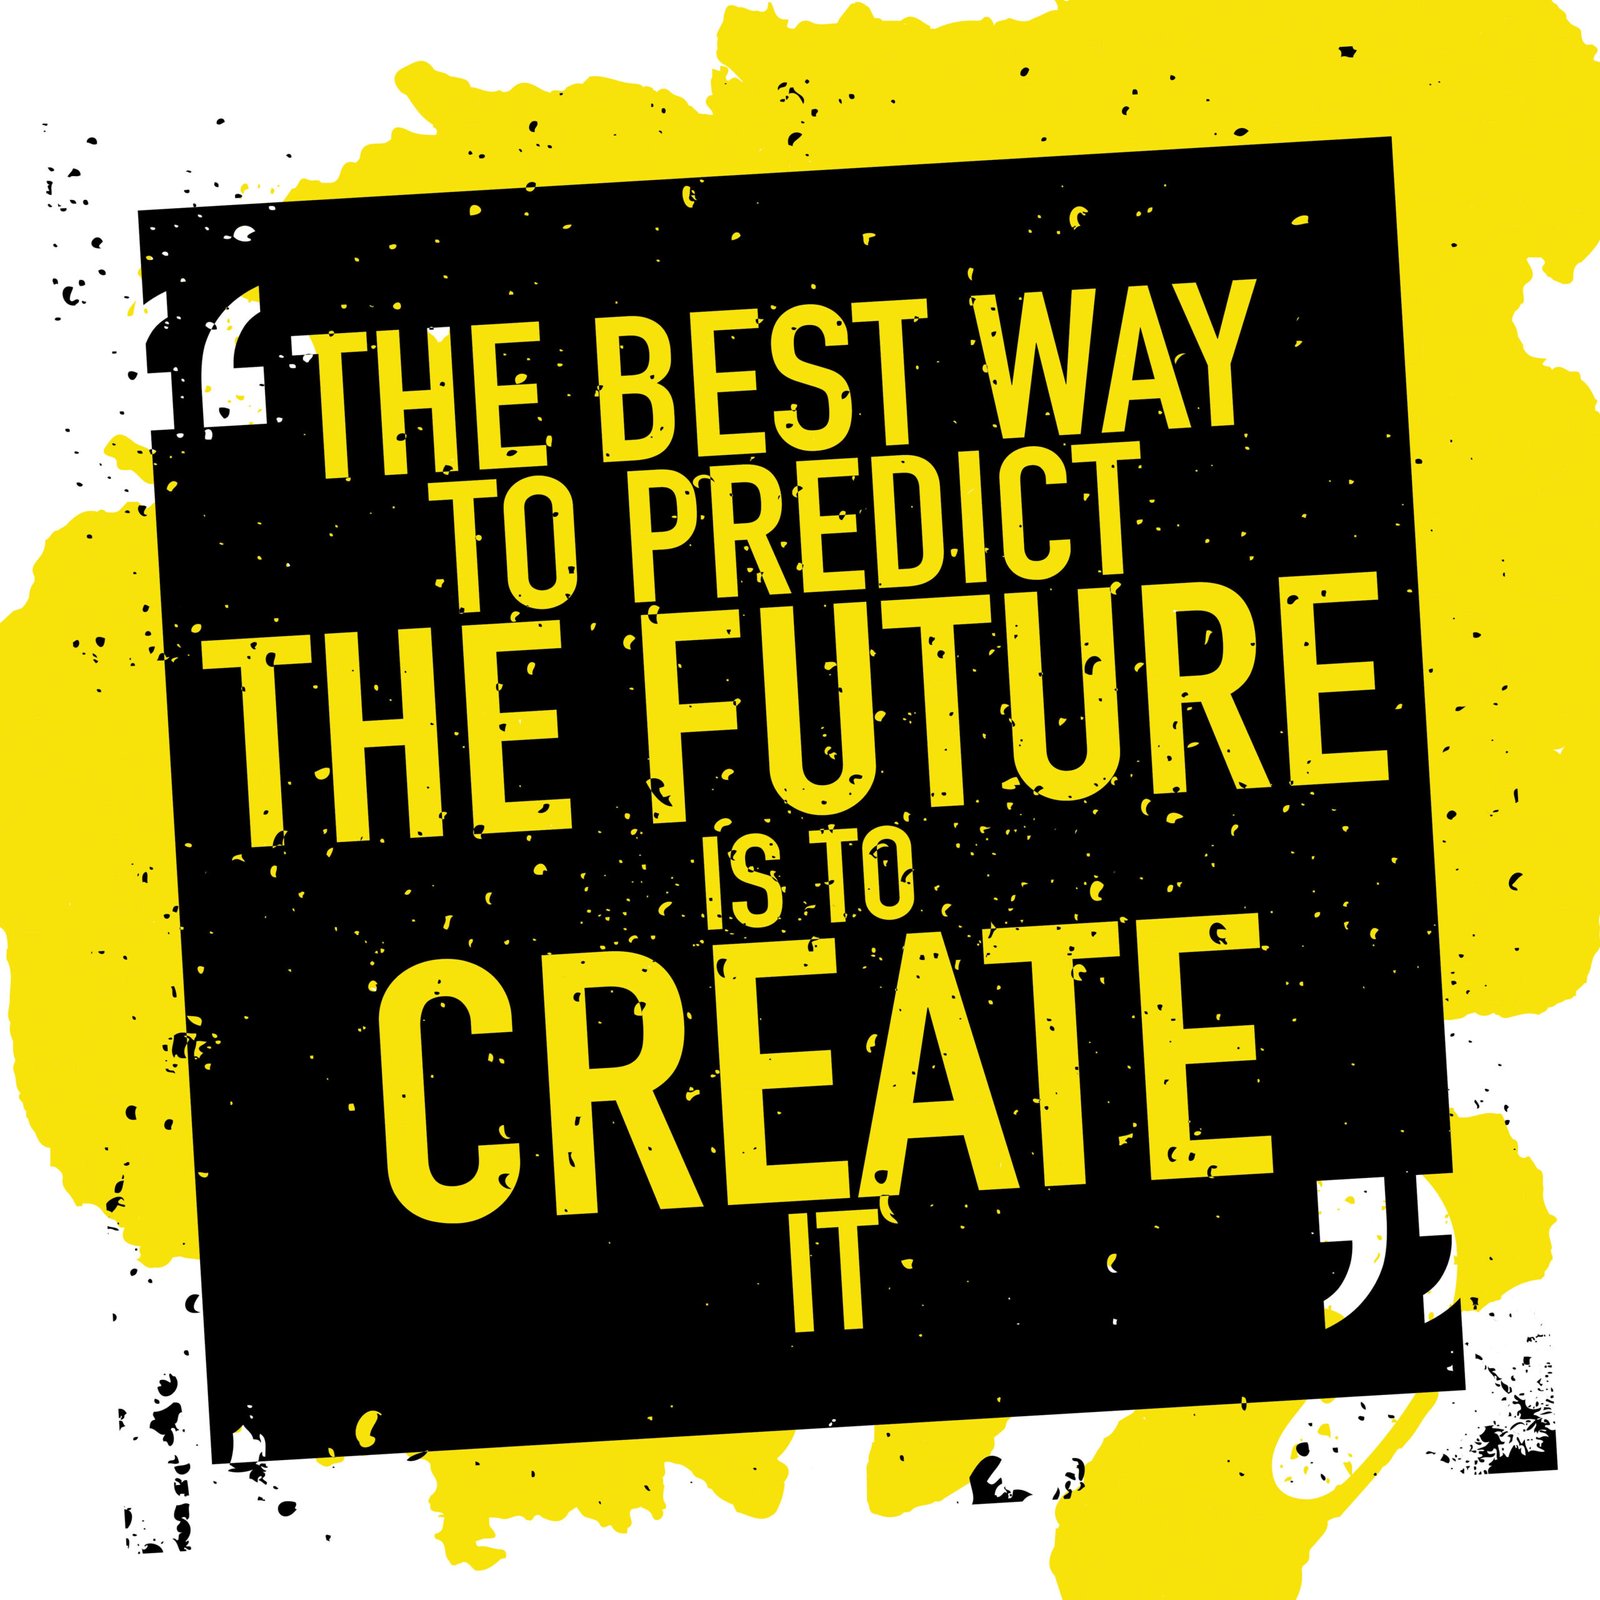 The Best Way to Predict the Future opt